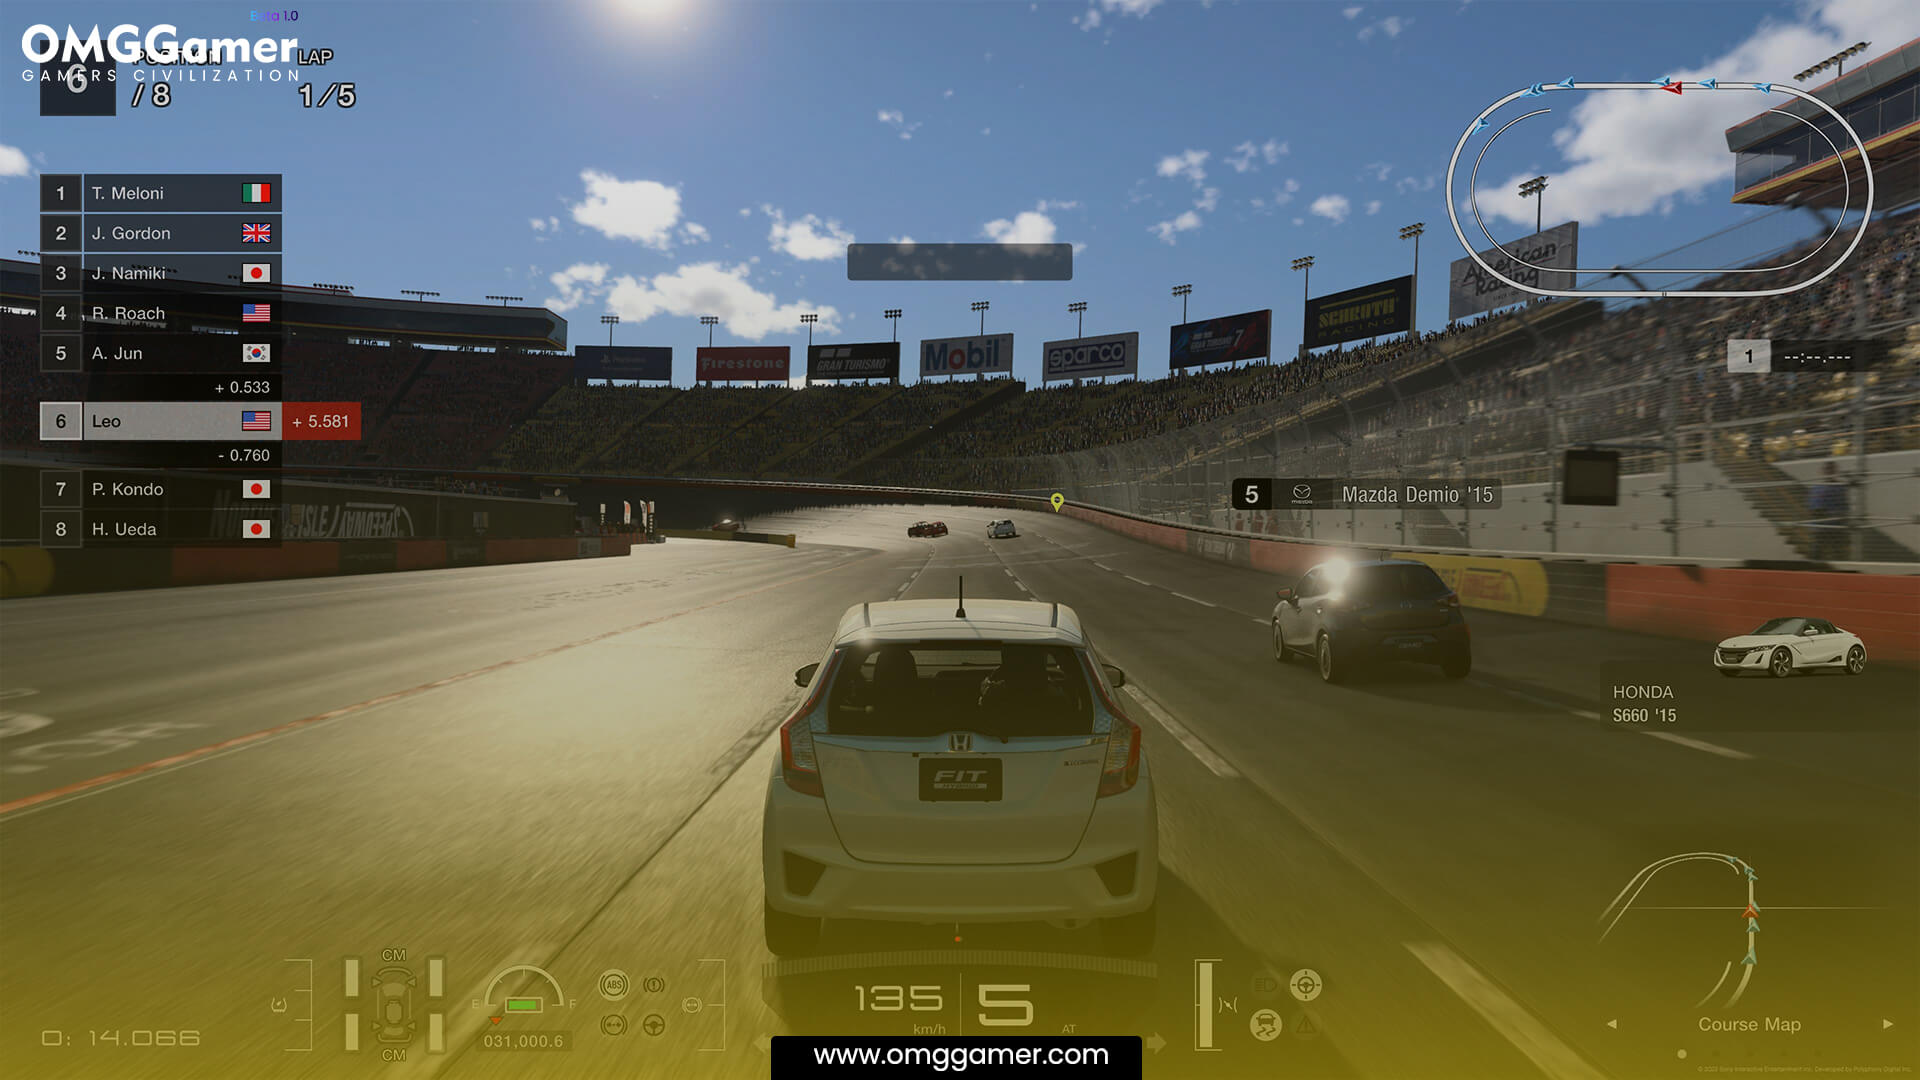 Is Gran Turismo 7 Cross platform between PS4 and Xbox One